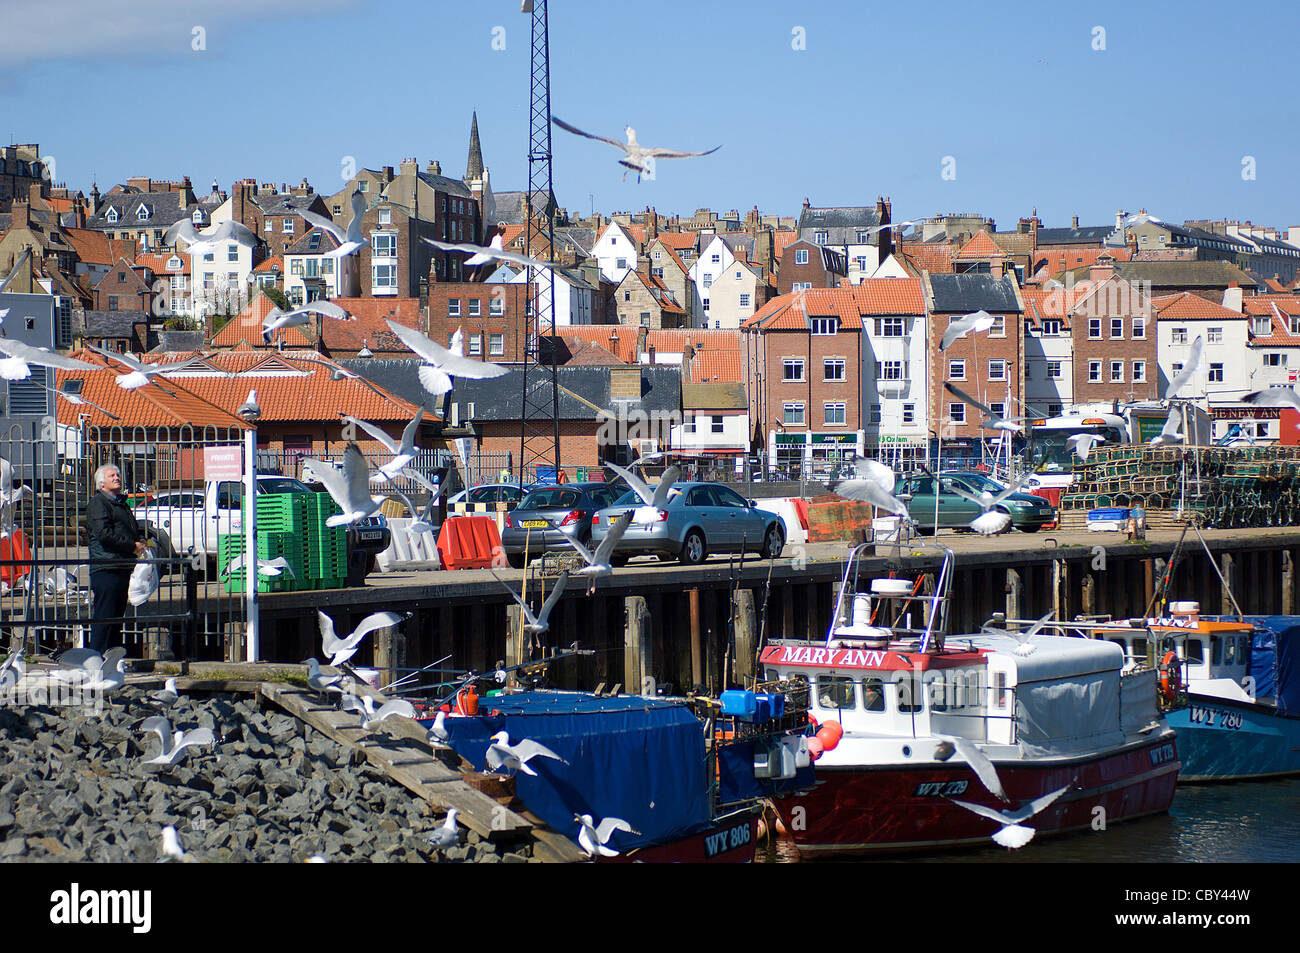 The large seagull population is evidence of the fact that the town of Whitby in N Yorks, England is a flourishing fishing port. Stock Photo